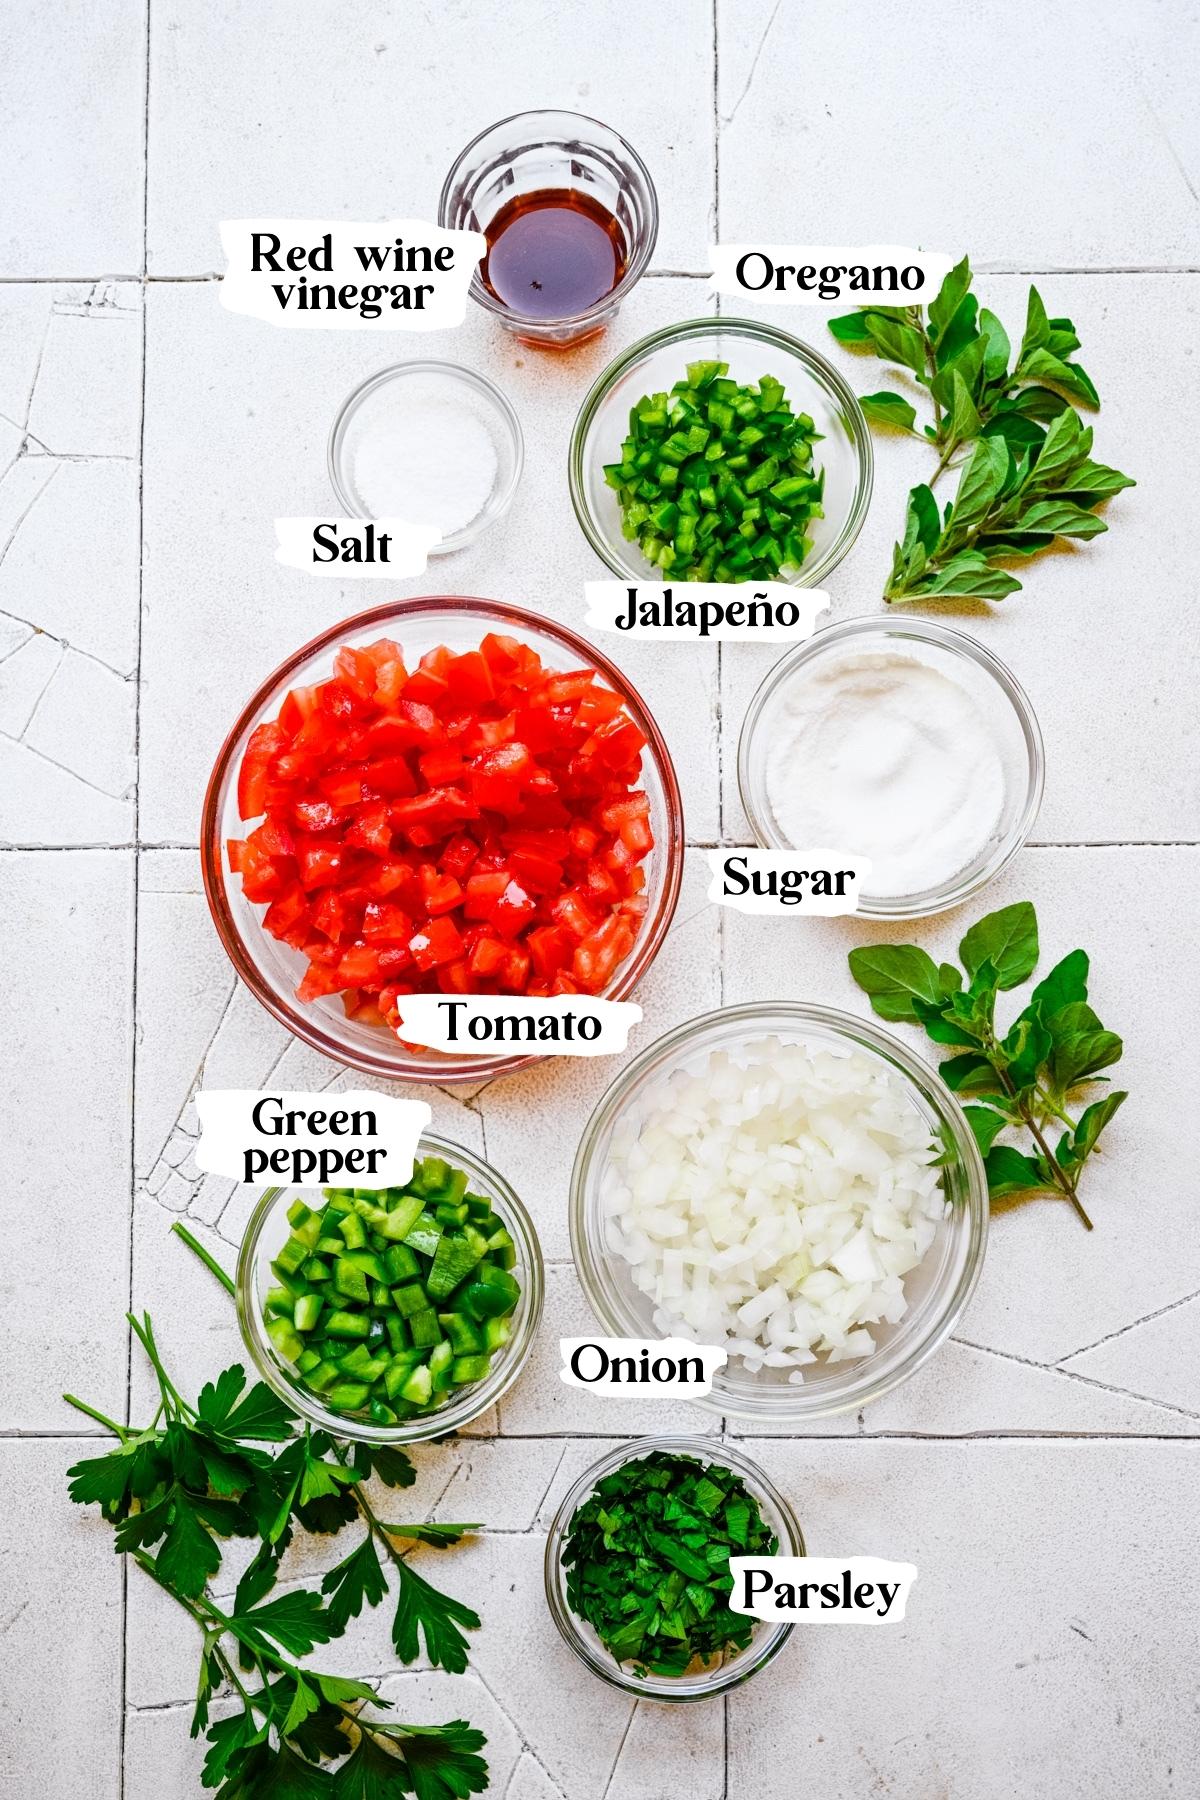 Overhead view of tomato relish ingredients, including tomatoes and onions.